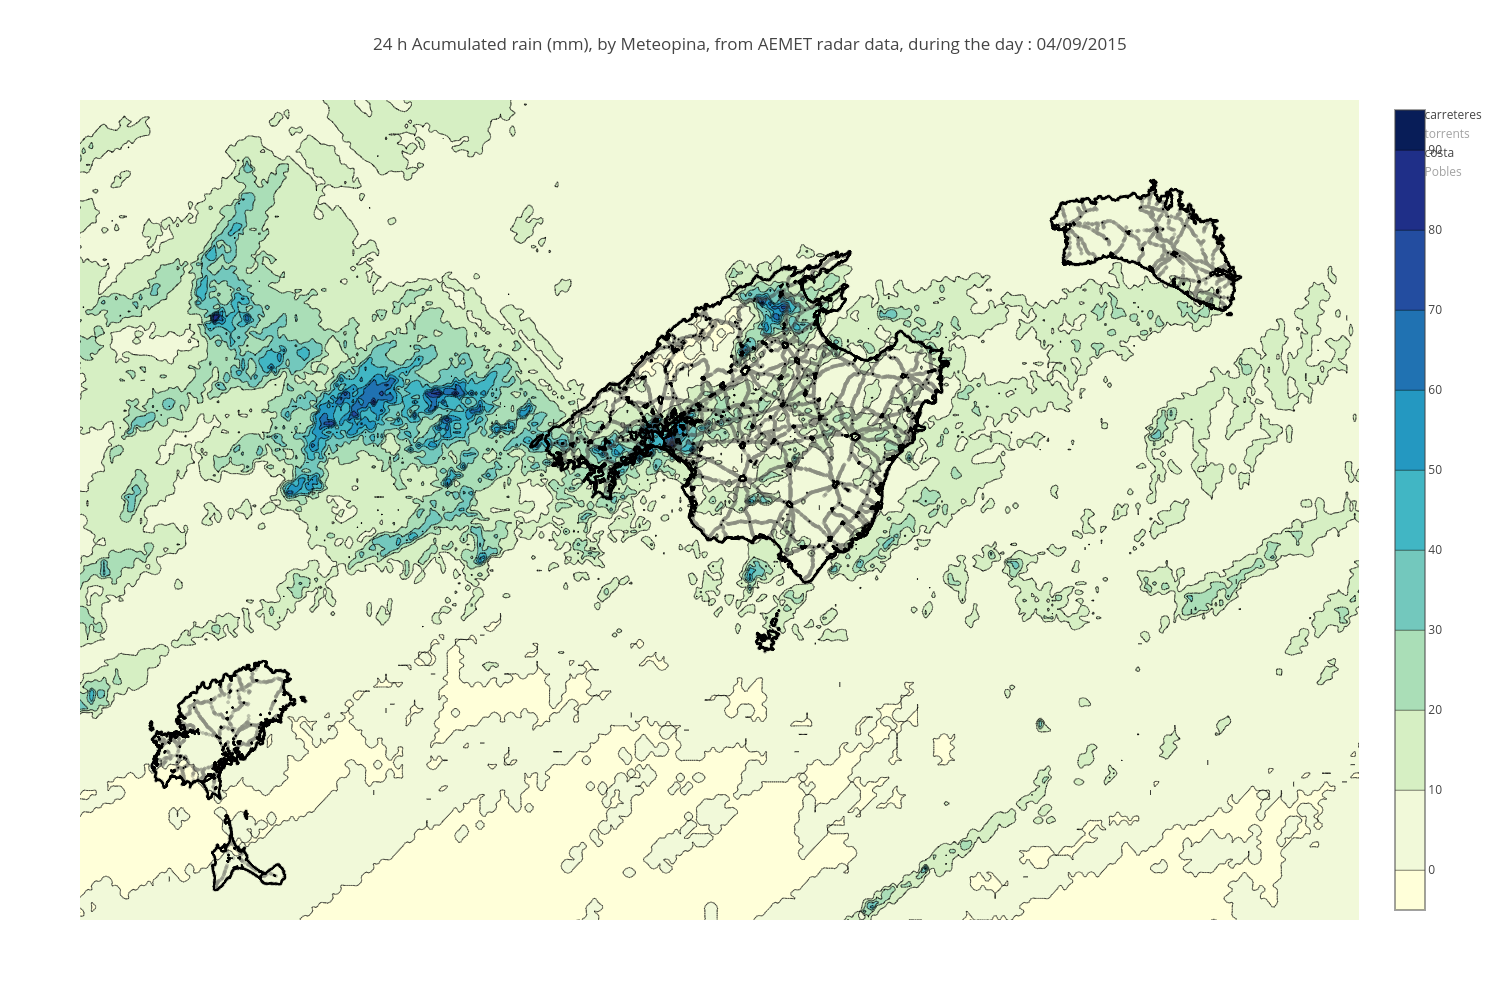 24 h Acumulated rain (mm), by Meteopina, from AEMET radar data, during the day : 04/09/2015 | scatter chart made by Tonibois | plotly